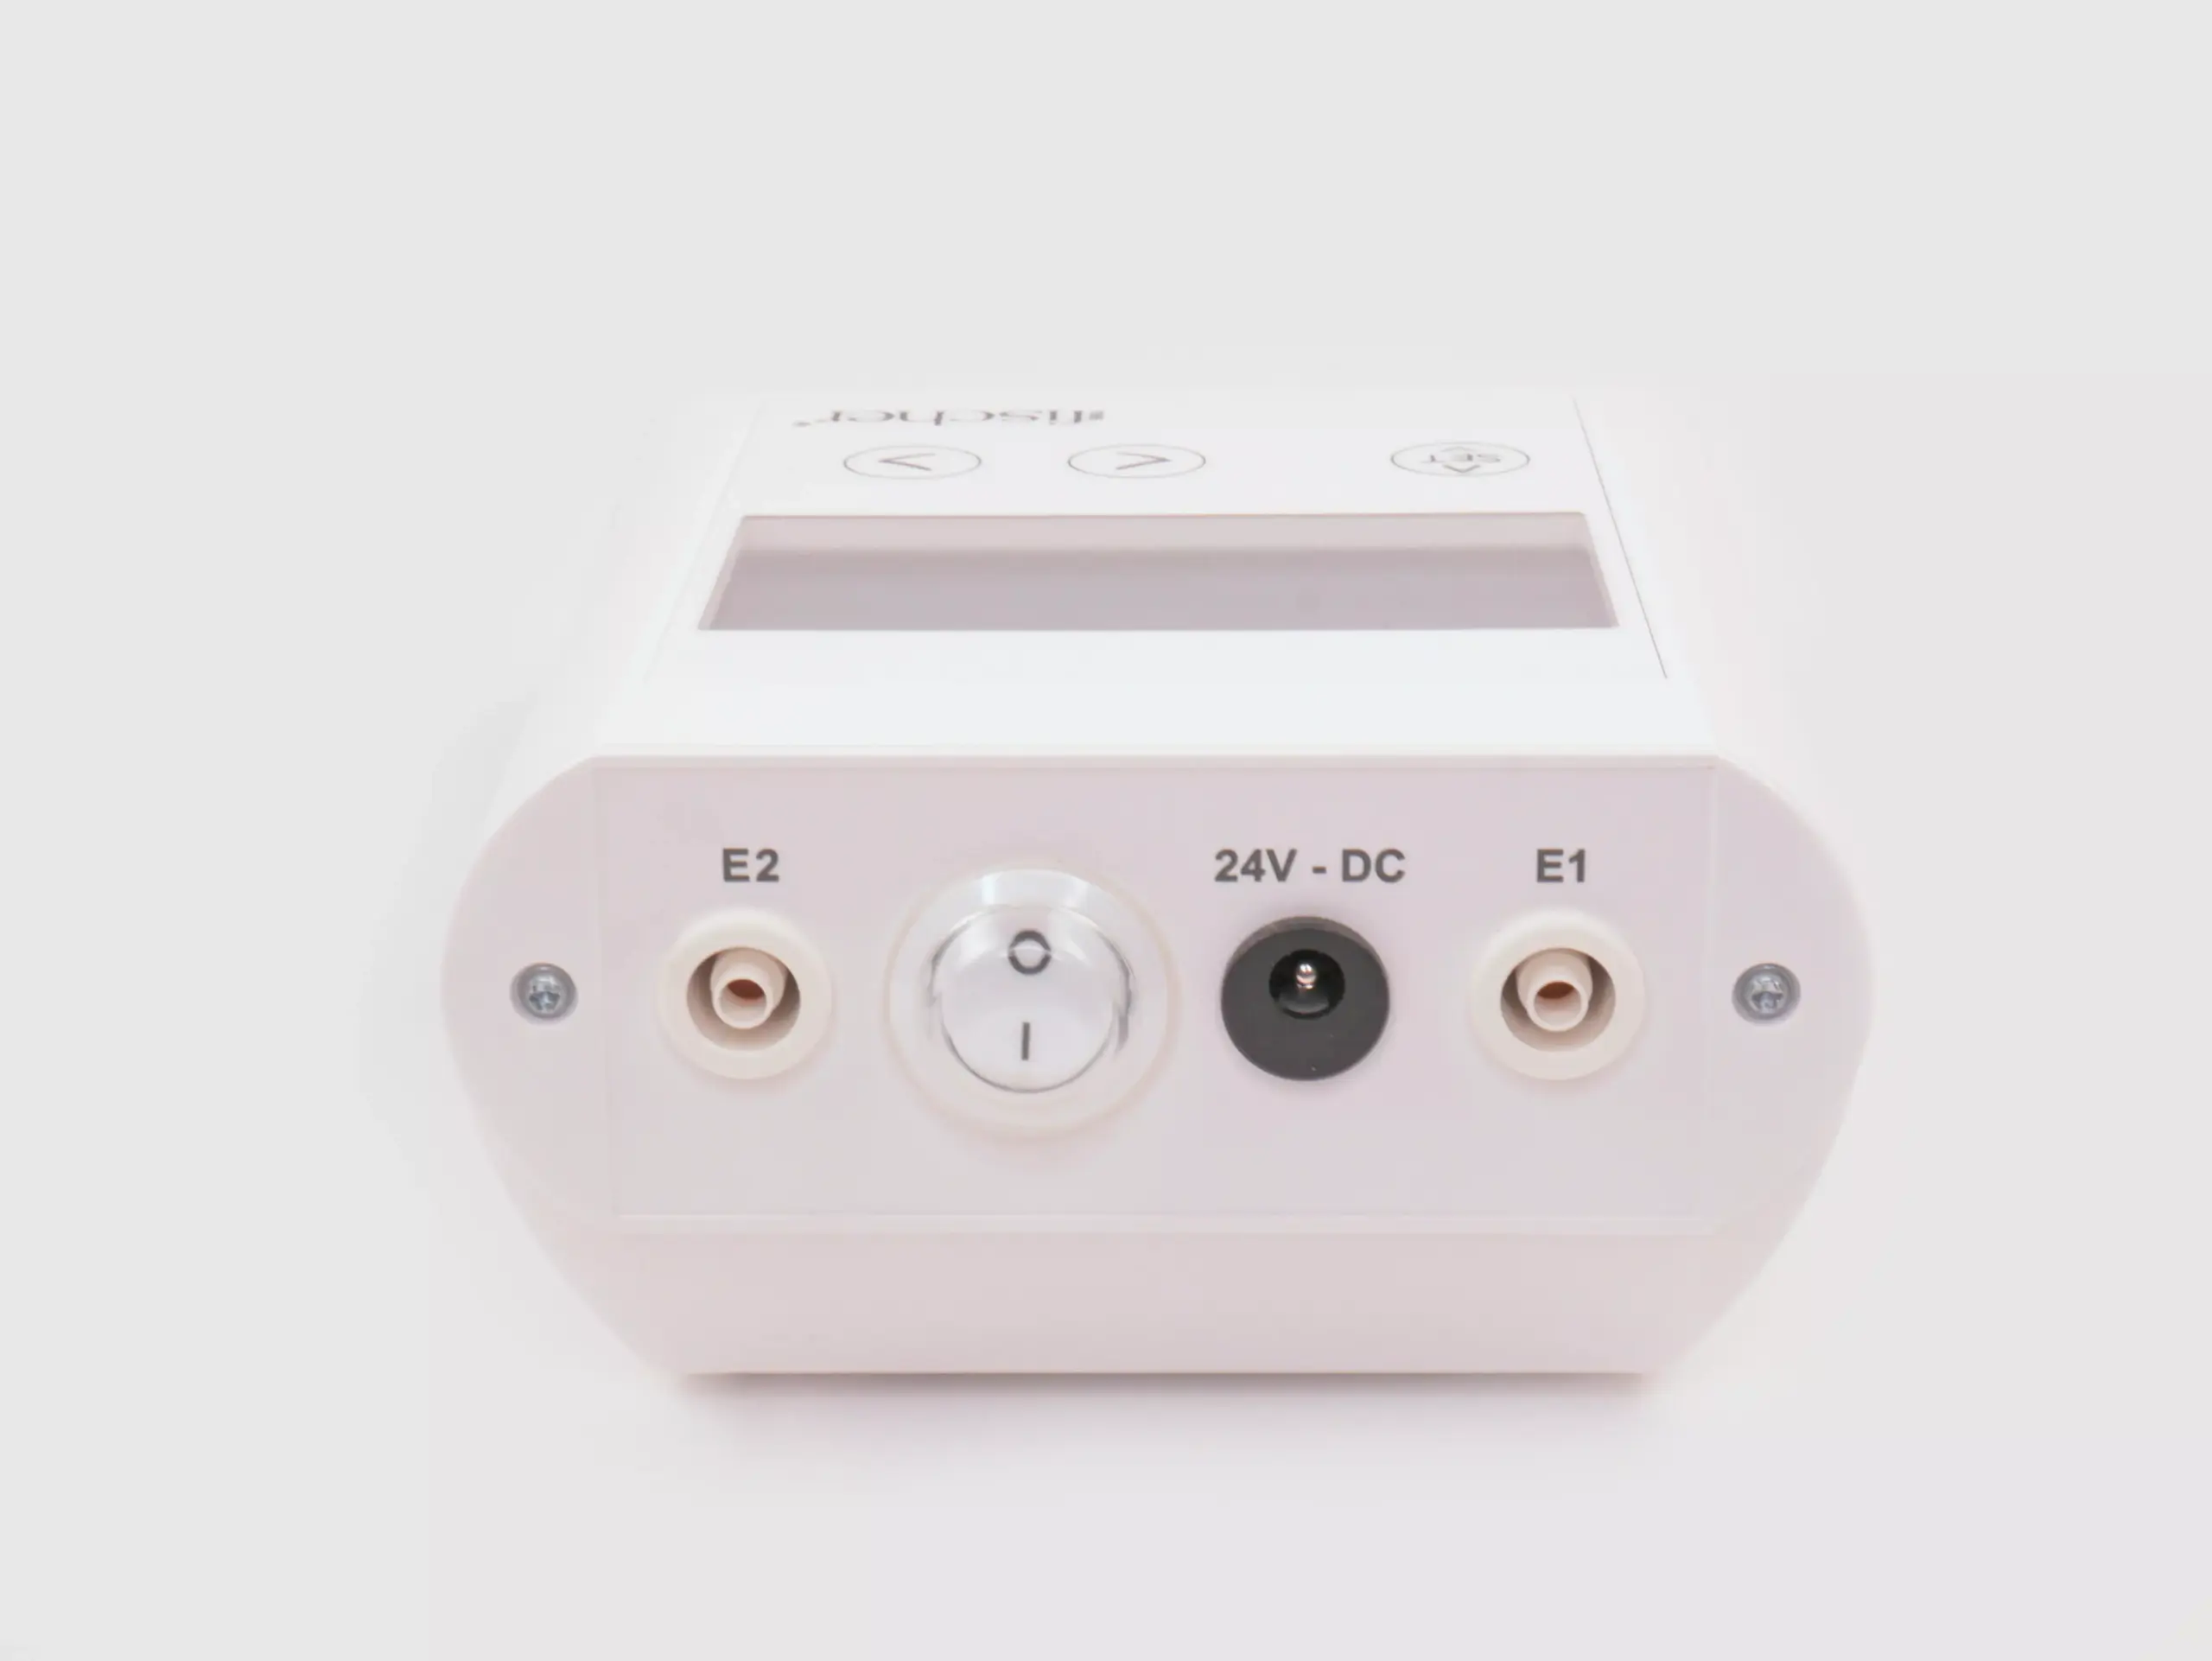 Image highlighting the back panel of RA Fischer's 'The Fischer' Device, showcasing the white, rectangular 'main control unit.' This specialized iontophoresis device is specifically designed to address hyperhidrosis (excessive sweating). In the photograph, you can discern the power switch and the electrode ports. The background is solid white. [ Iontophoresis Device for Sweating ]